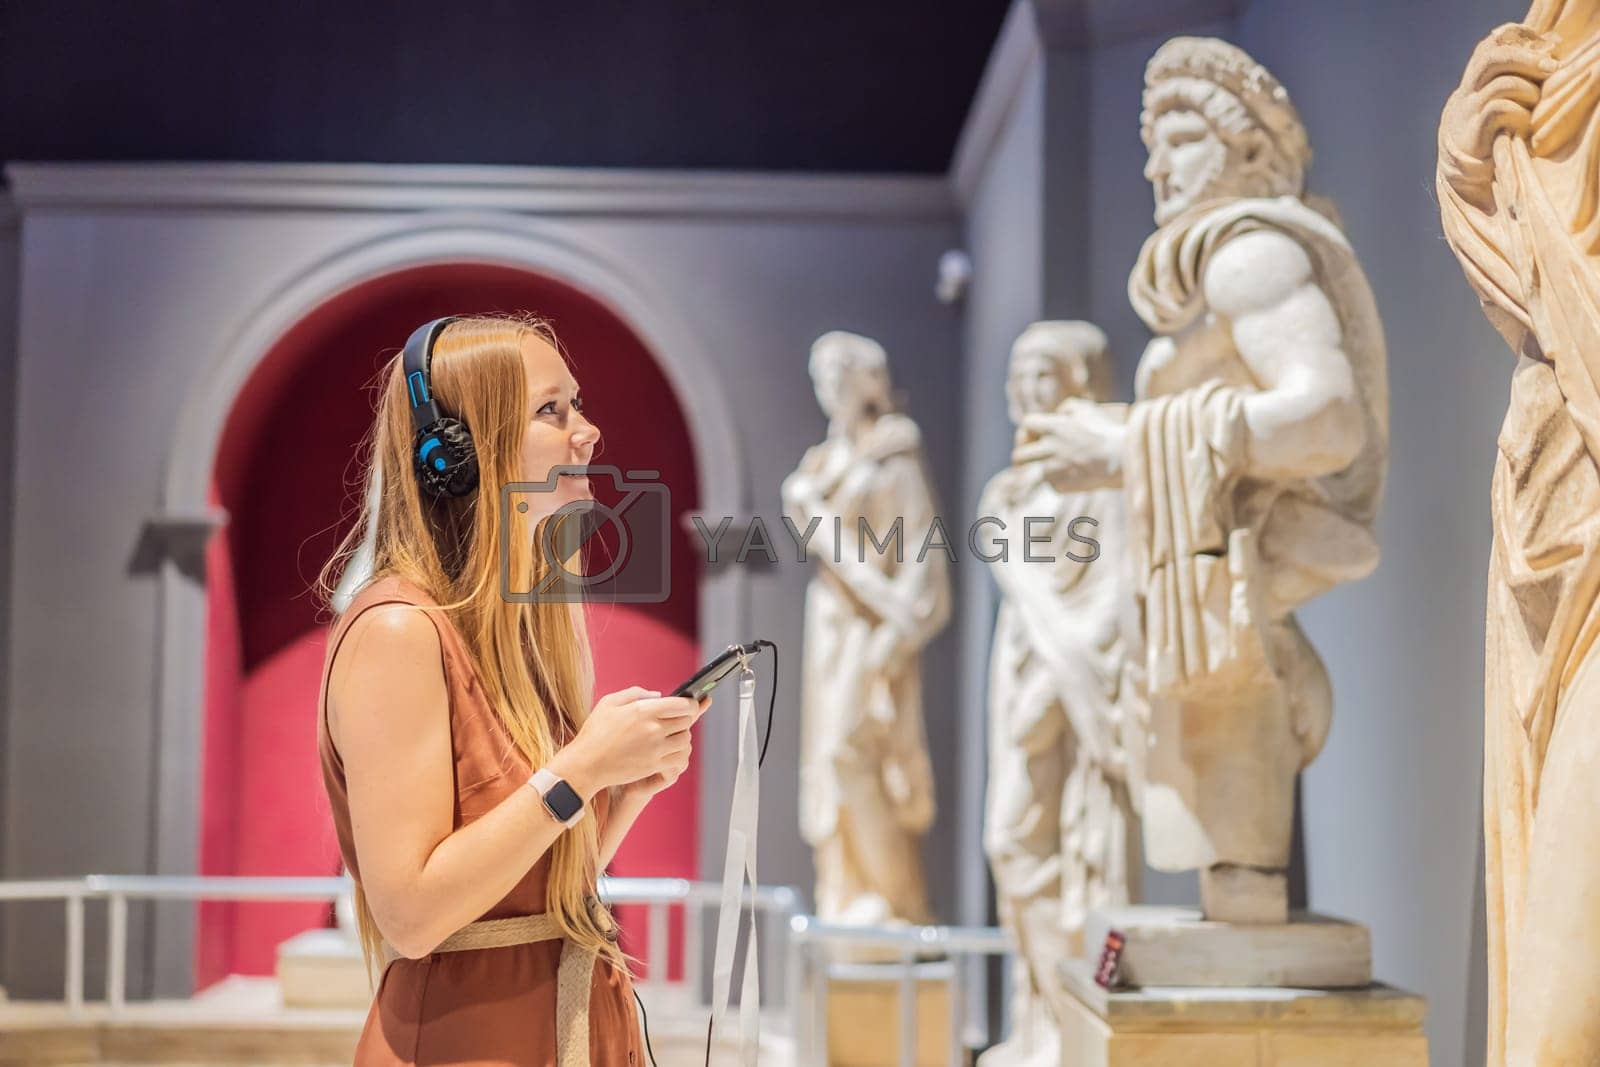 Royalty free image of Portrait of contemporary young woman looking at sculptures and listening to audio guide at museum exhibition by galitskaya